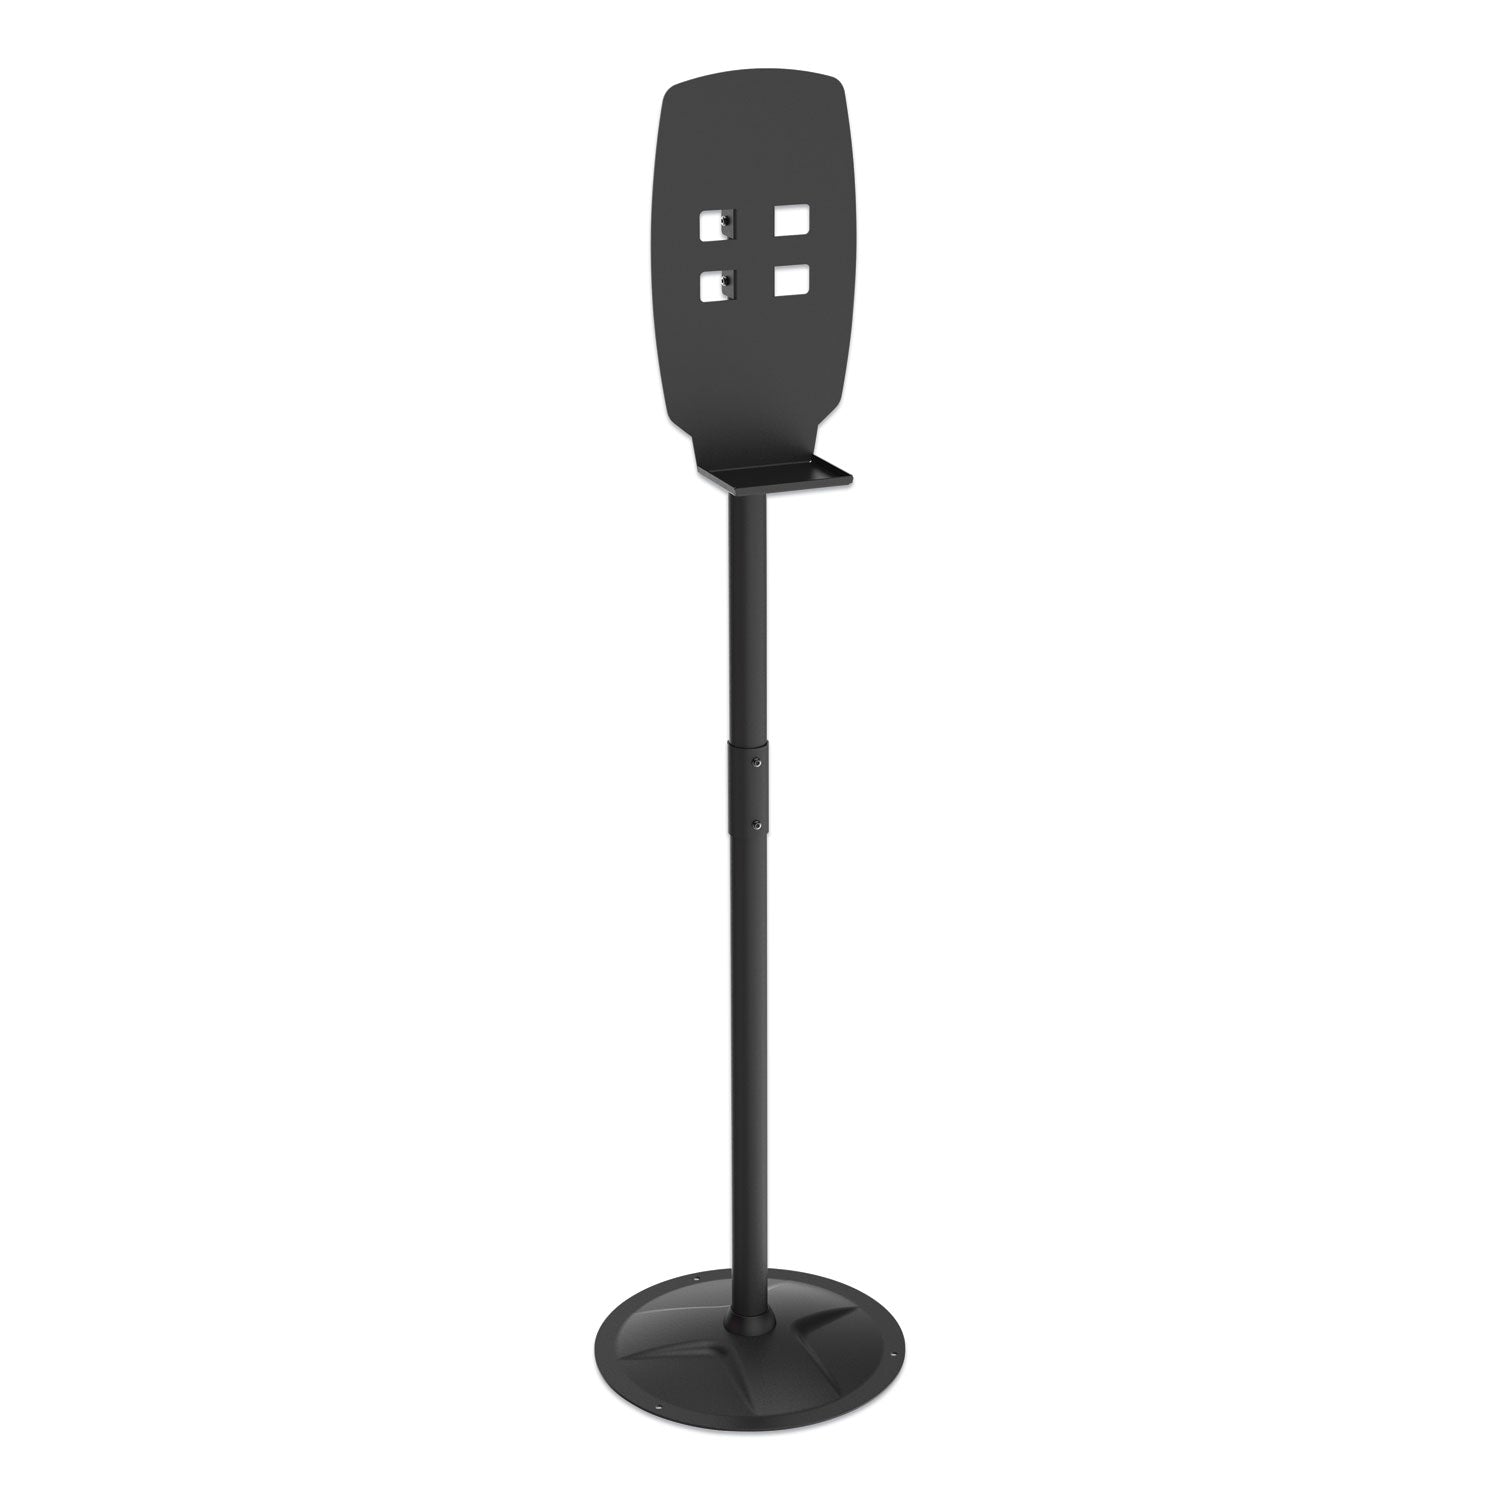 floor-stand-for-sanitizer-dispensers-height-adjustable-from-50-to-60-black_ktksd200 - 2